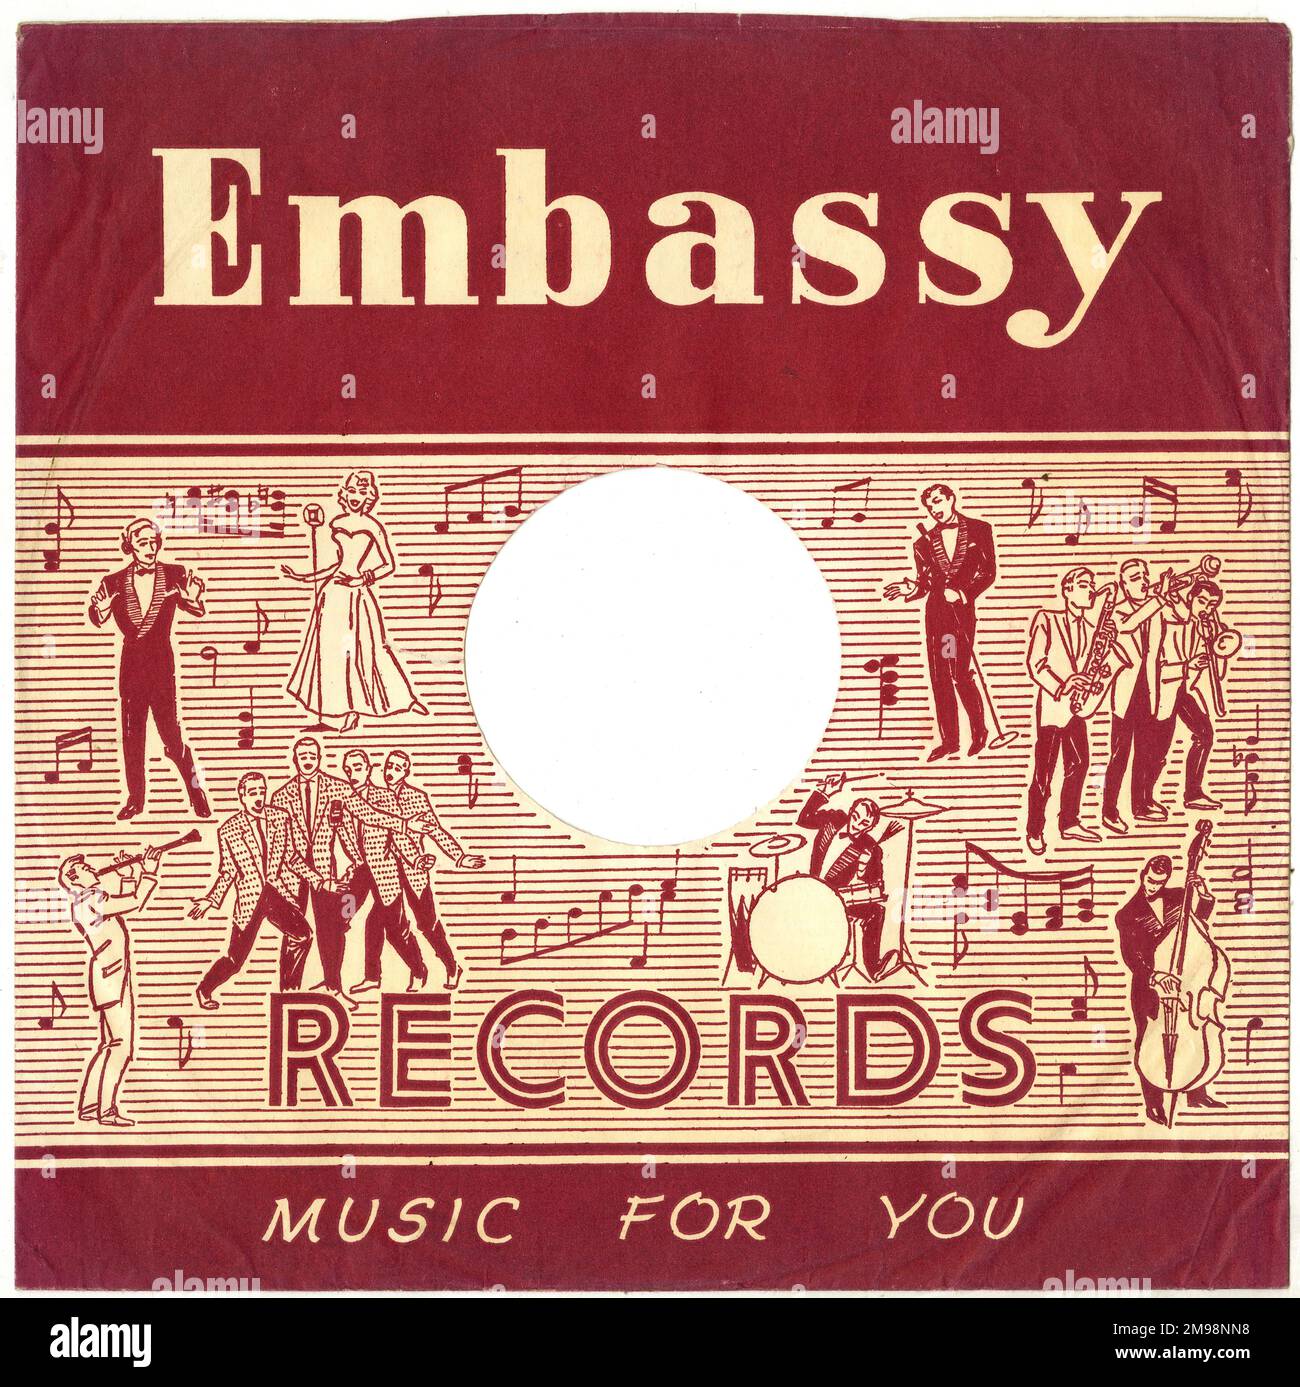 78 U/min Cover Sleeve, Embassy Records, Music for You. Stockfoto